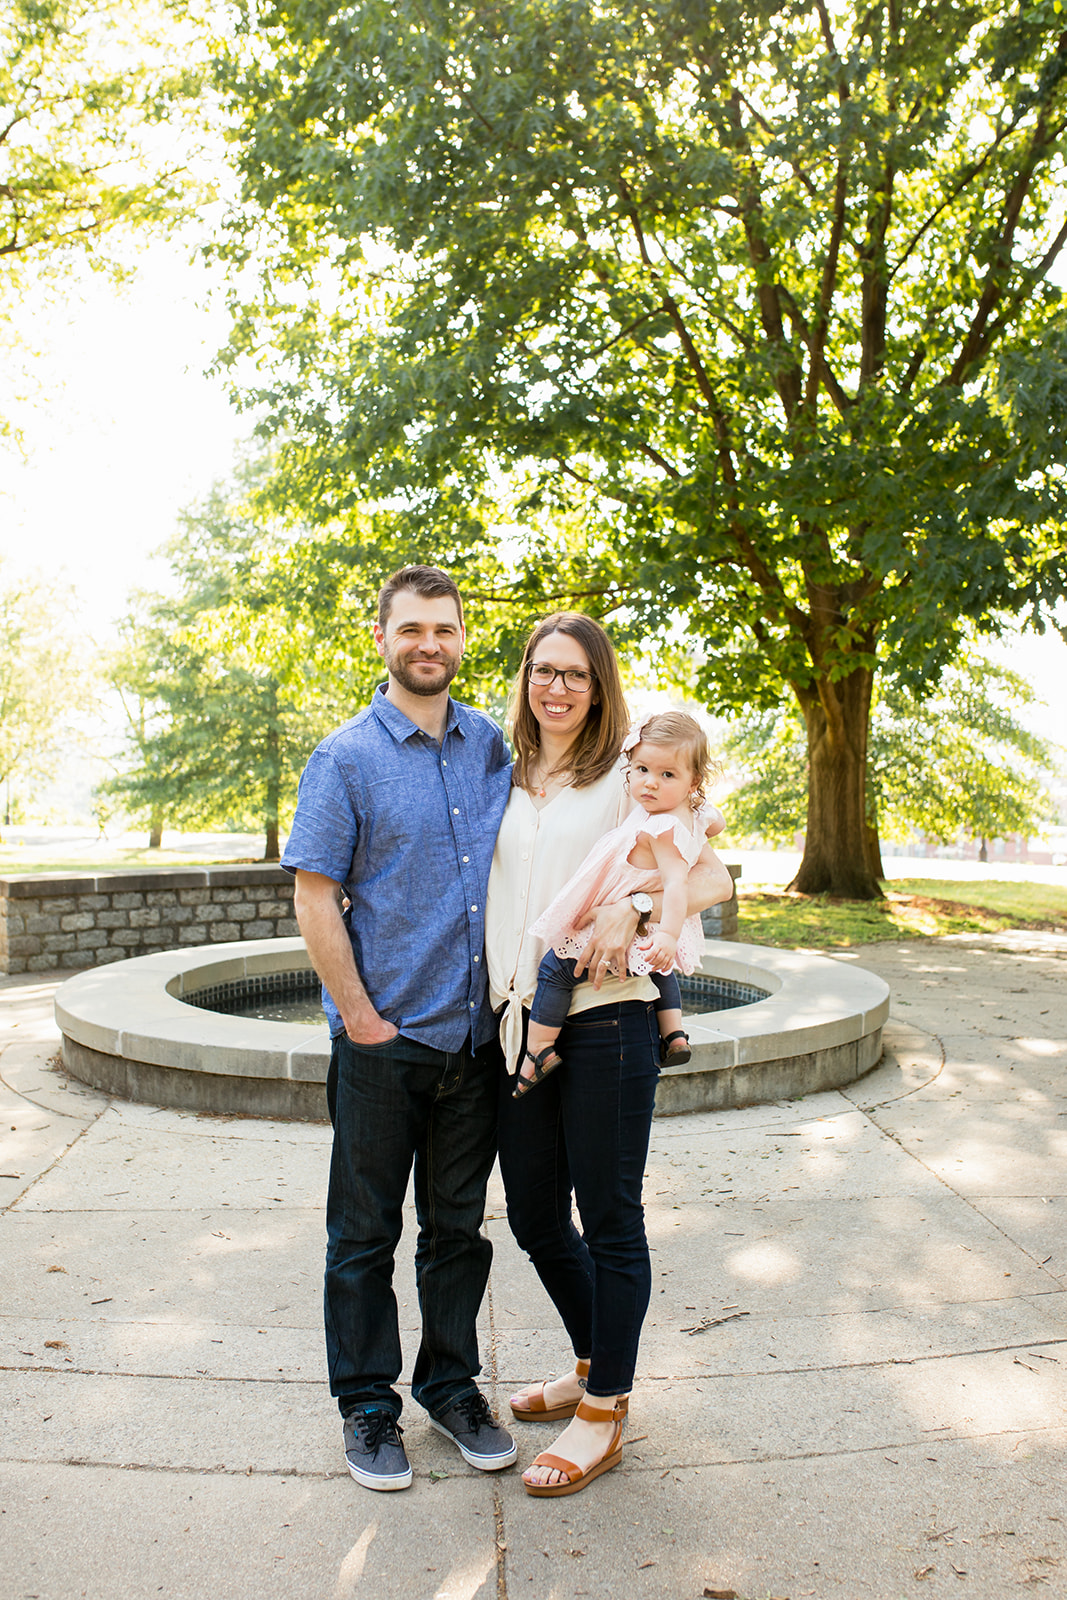 Libby Hill Park Spring One Year Old Family Photos - Image Property of www.j-dphoto.com